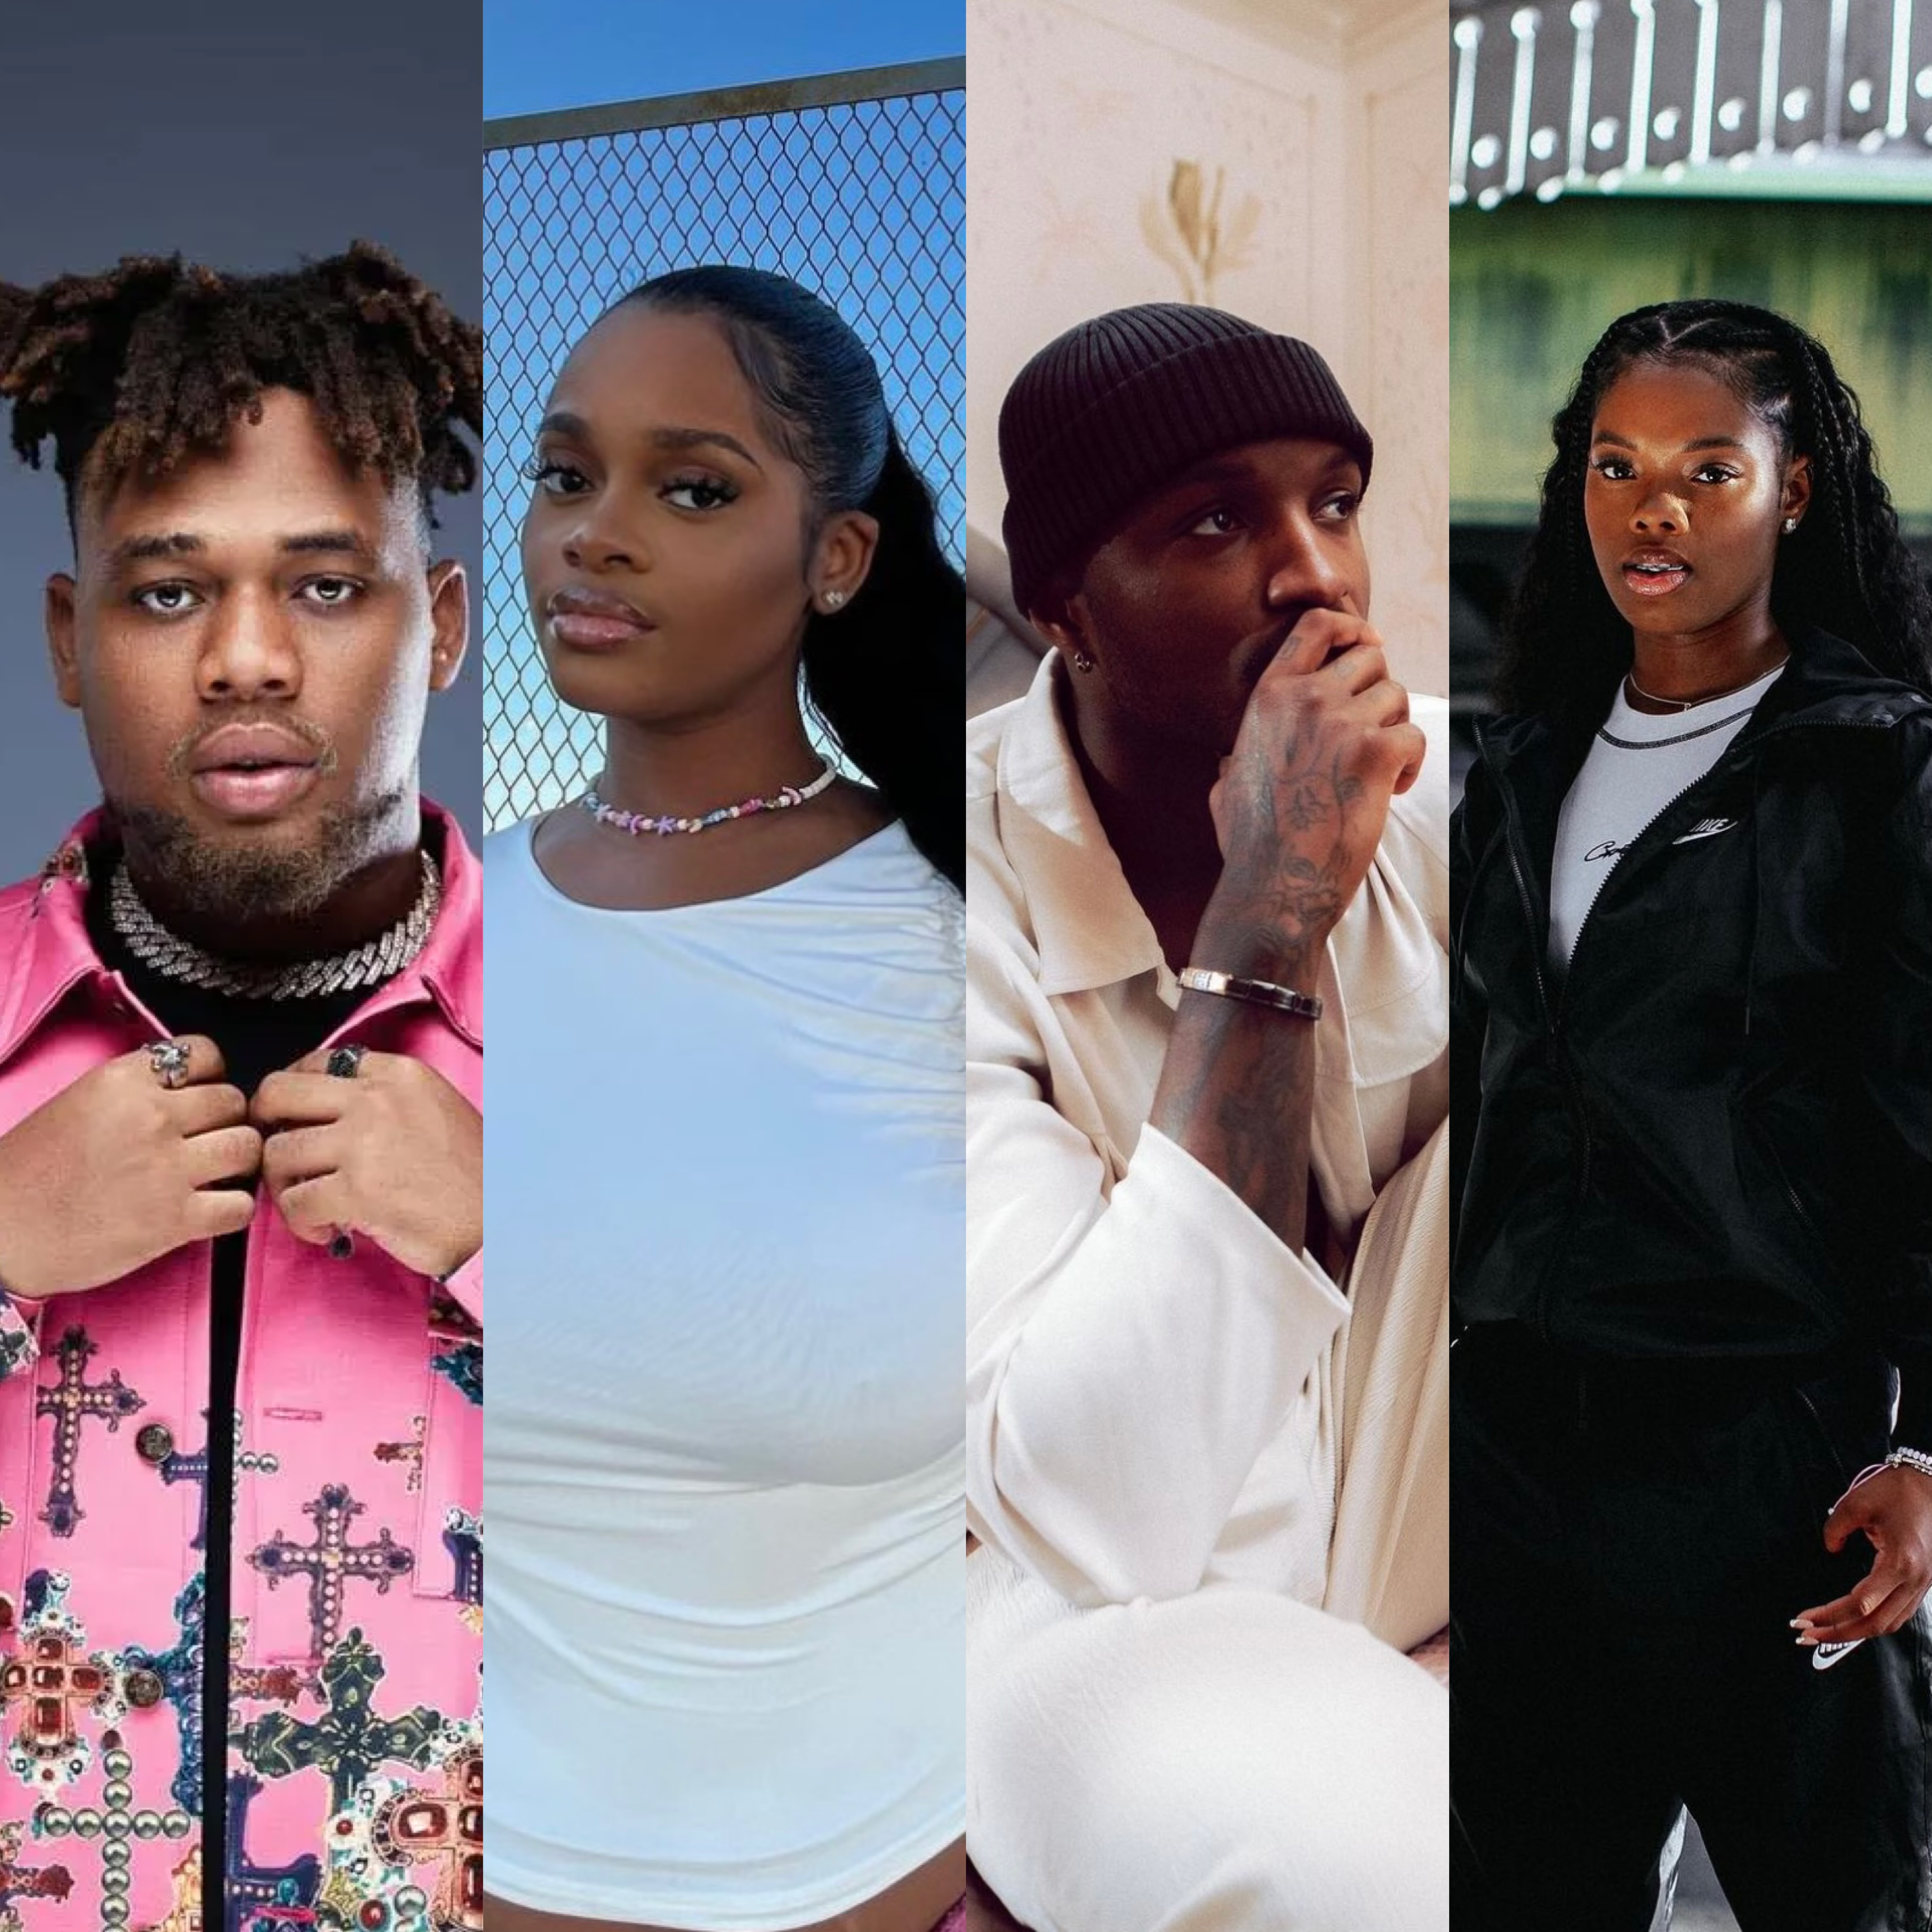 Re-Up – The New Releases You Need To Tap Into Featuring [@SummerBanton], [@BNXN], [@Cristaleyy], [@FemiTahiru], [@Darkoo] & more